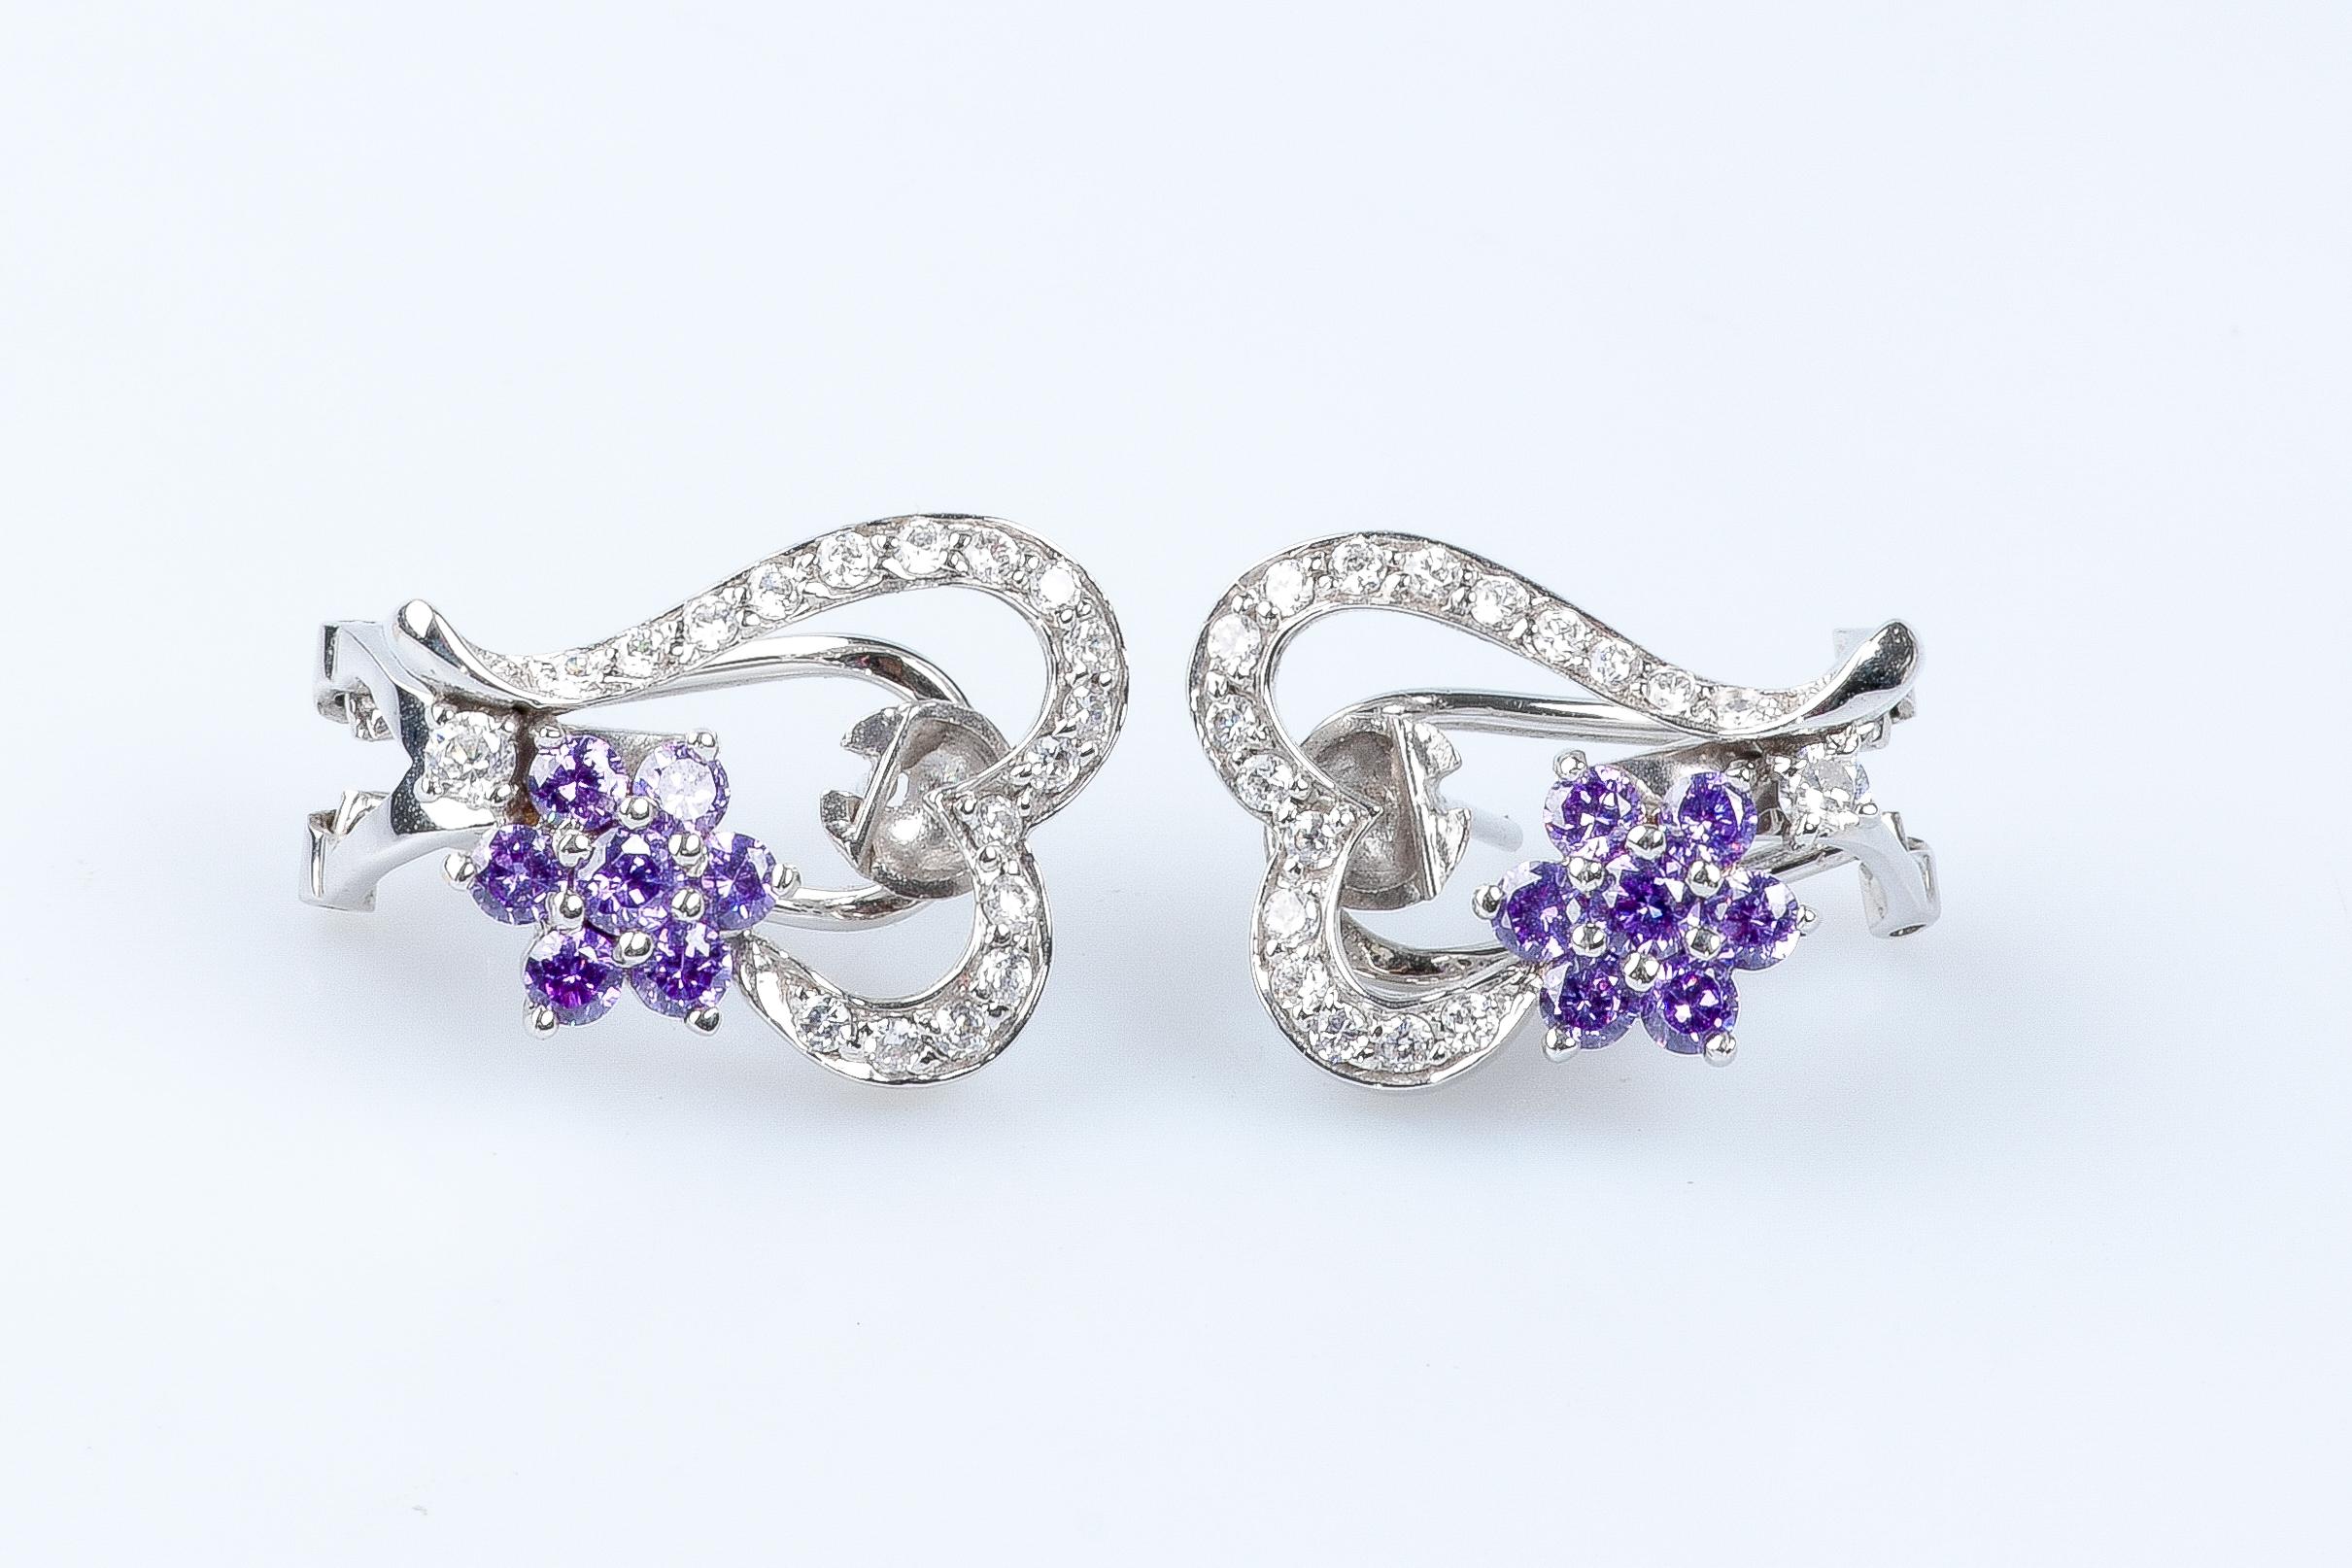 18 carat white gold earrings designed with 7 mauve zirconium oxides and 18 zirconium oxides.

Weight:  10.20 gr.

Dimensions : 2.00 x 1.60 x 0.40 cm 

Jewel delivered in a luxurious box with a certificate of authenticity Monte-Carlo Bijoux.